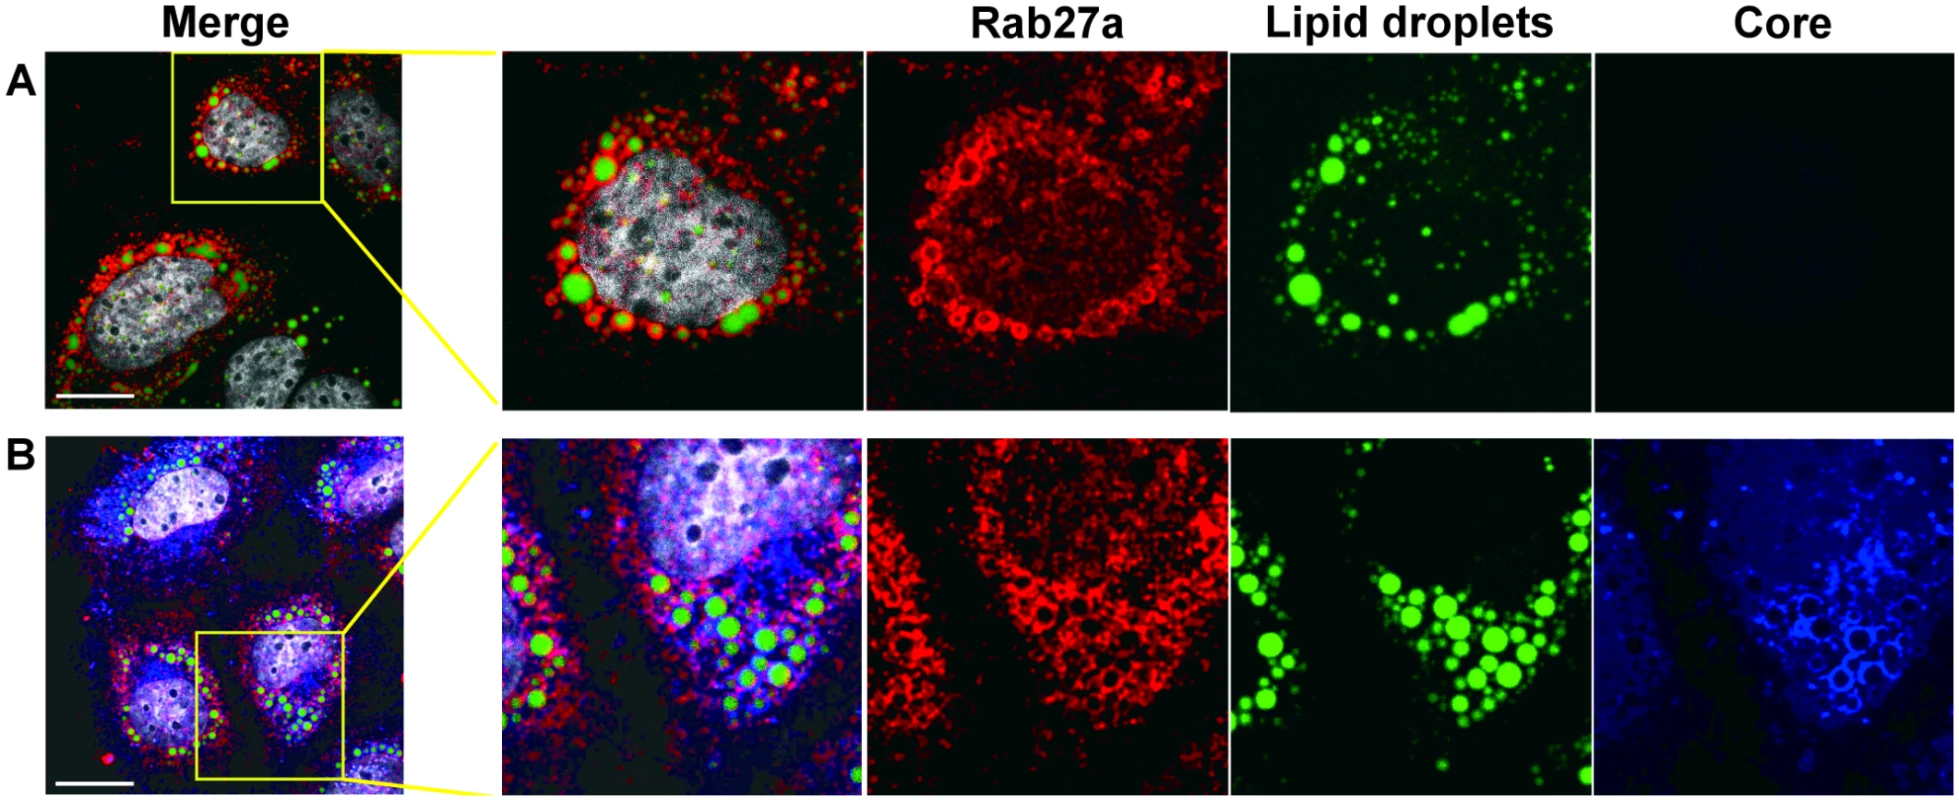 Subcellular localization of Rab27a.